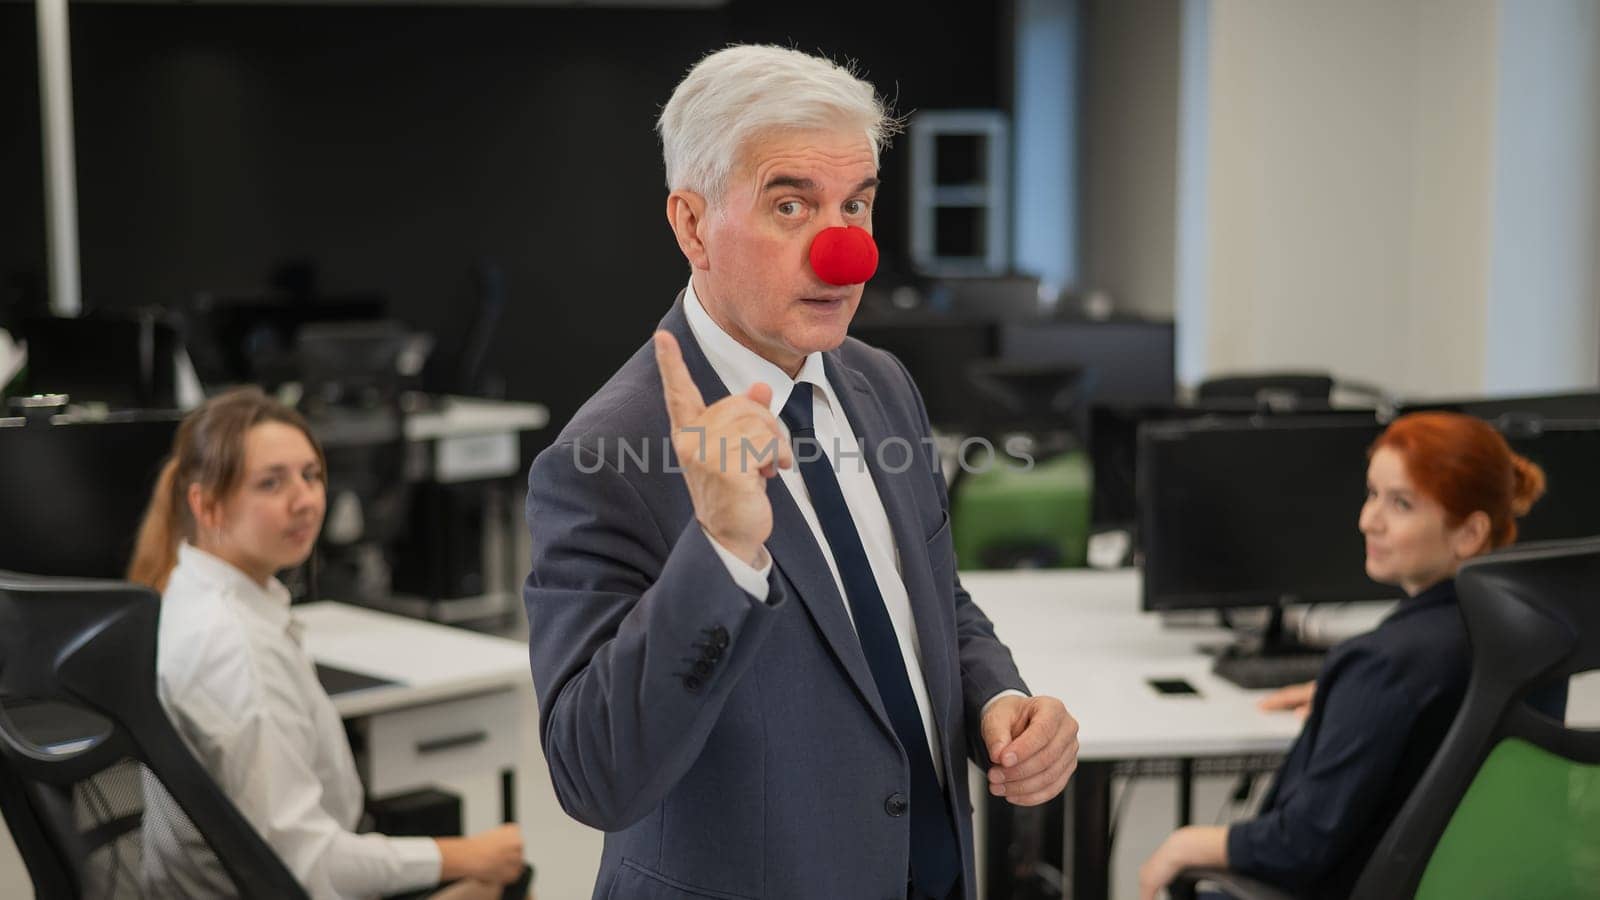 An elderly man with a clown nose stands next to two Caucasian women in the office